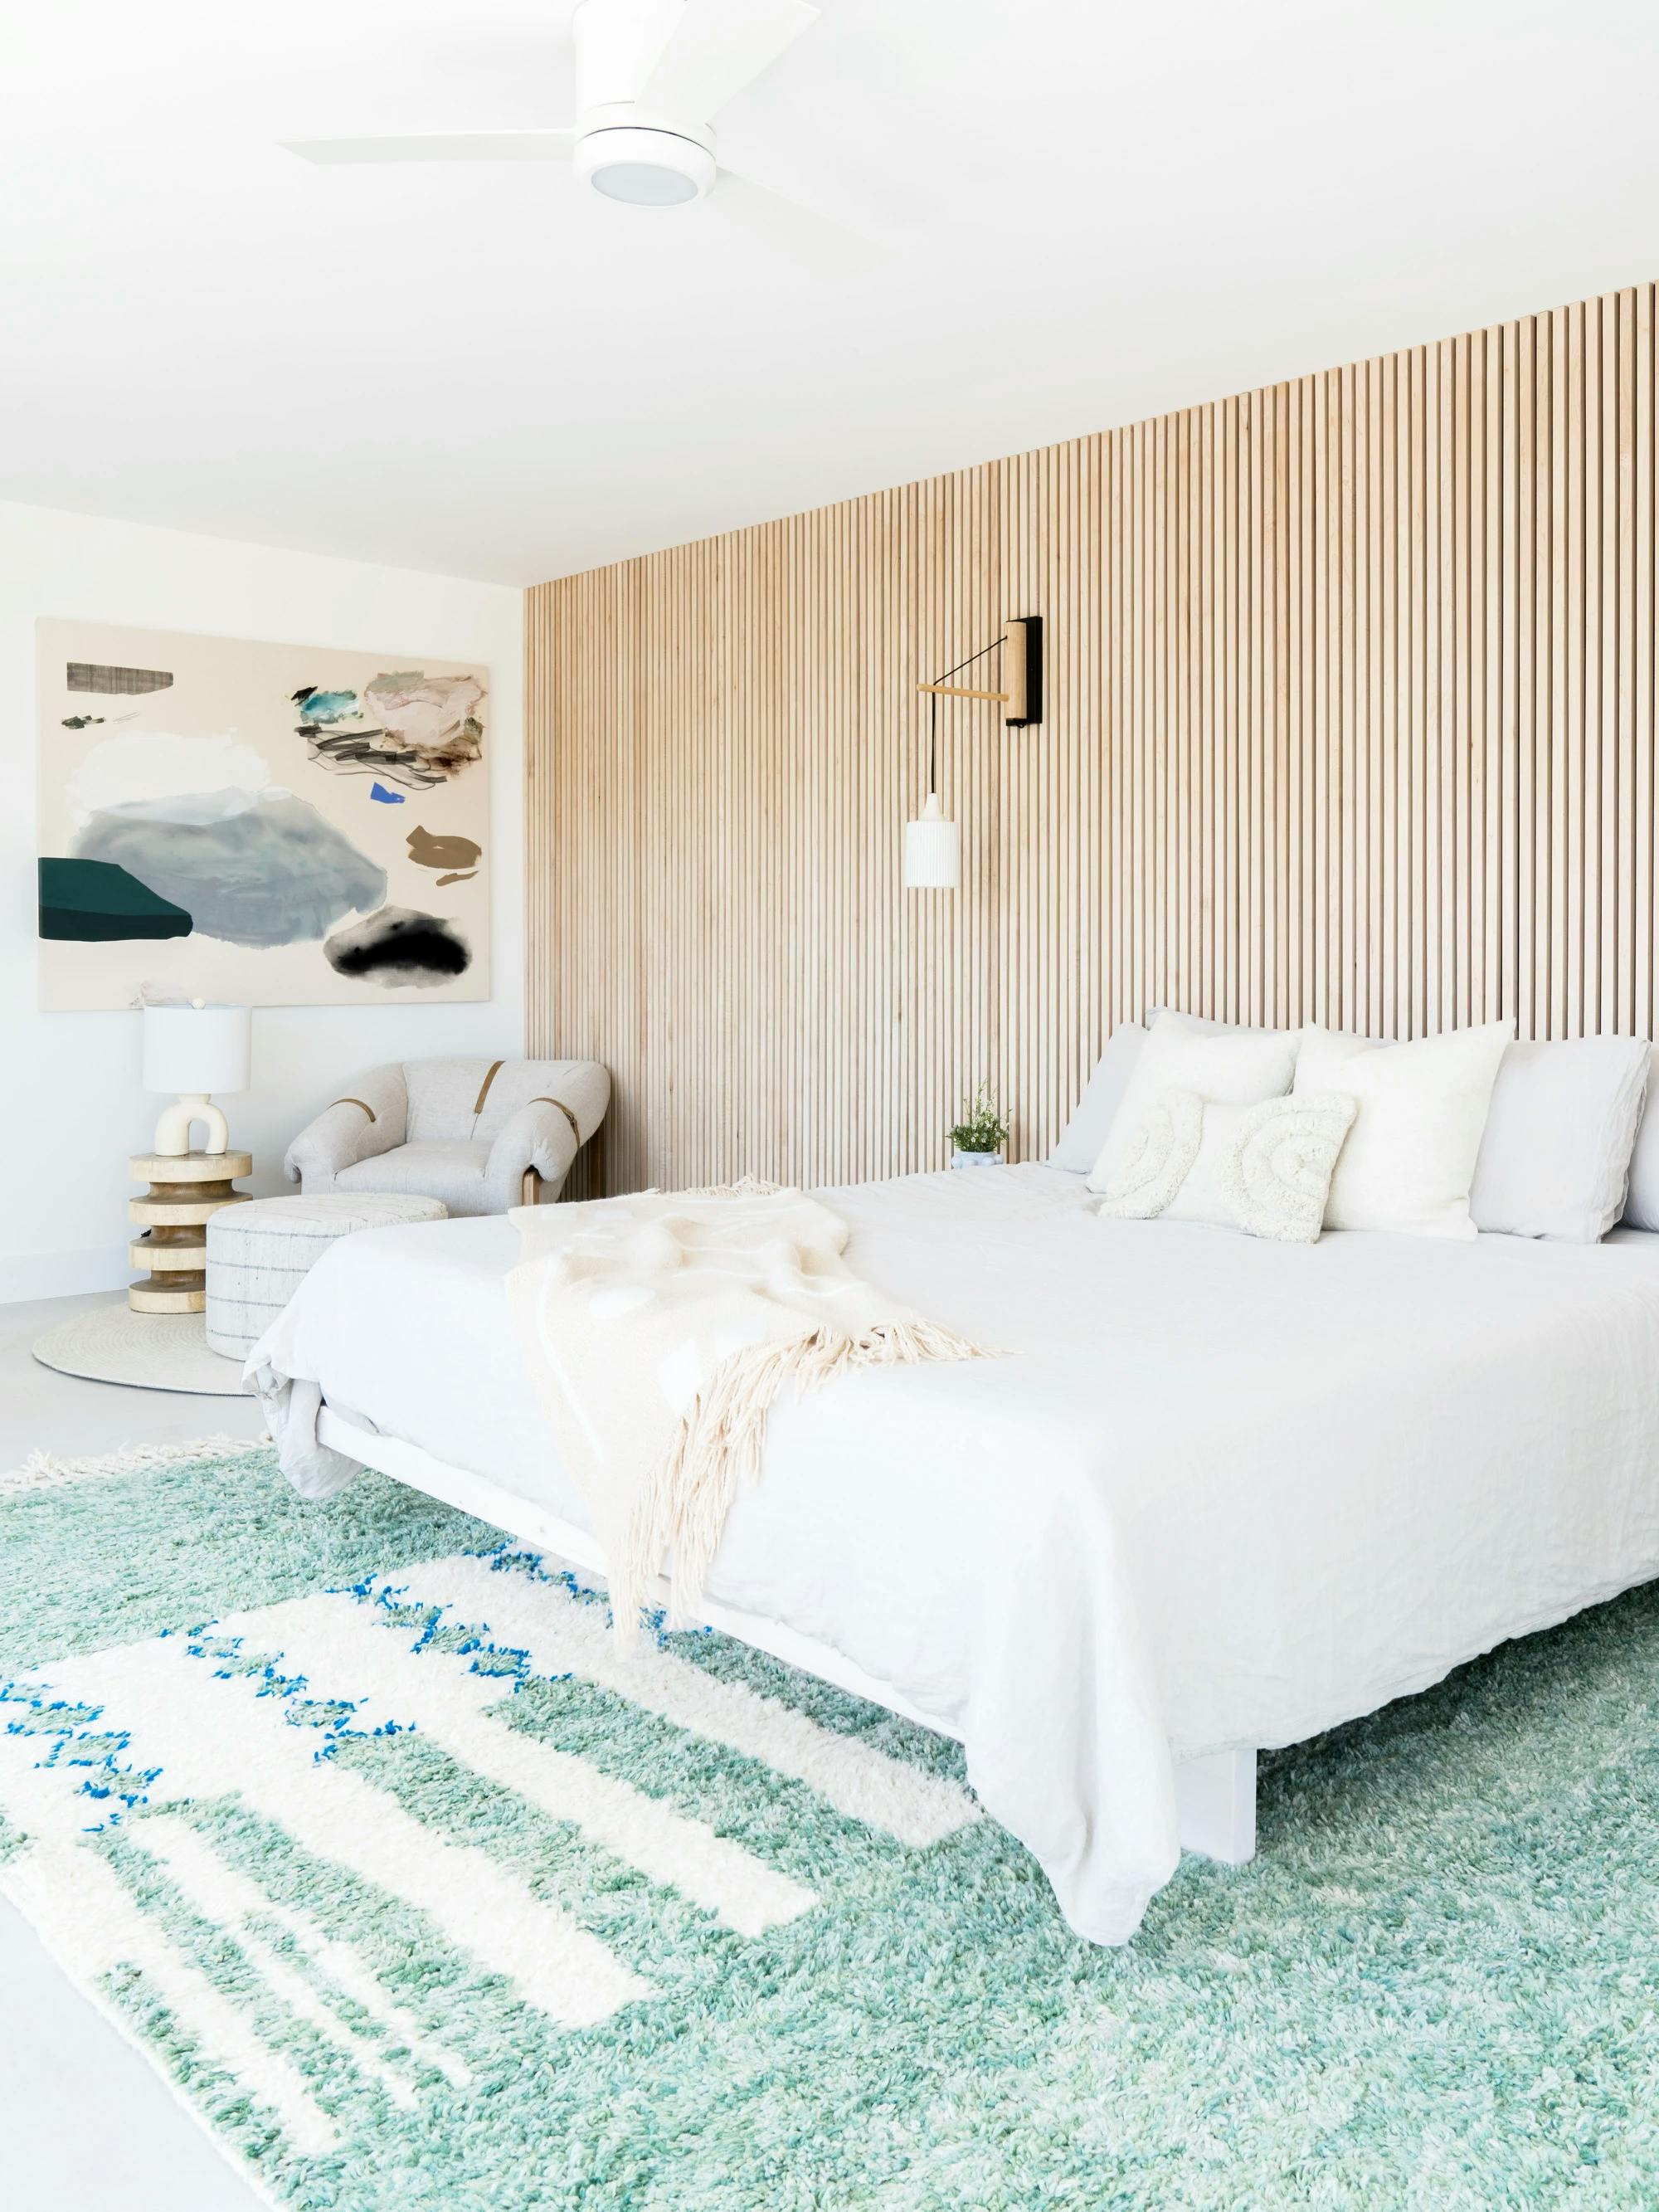 A neutral bedroom with a teal carpet, bed with white sheets, and an abstract painting by artist Karina Bania above a cushioned reading chair in the corner.